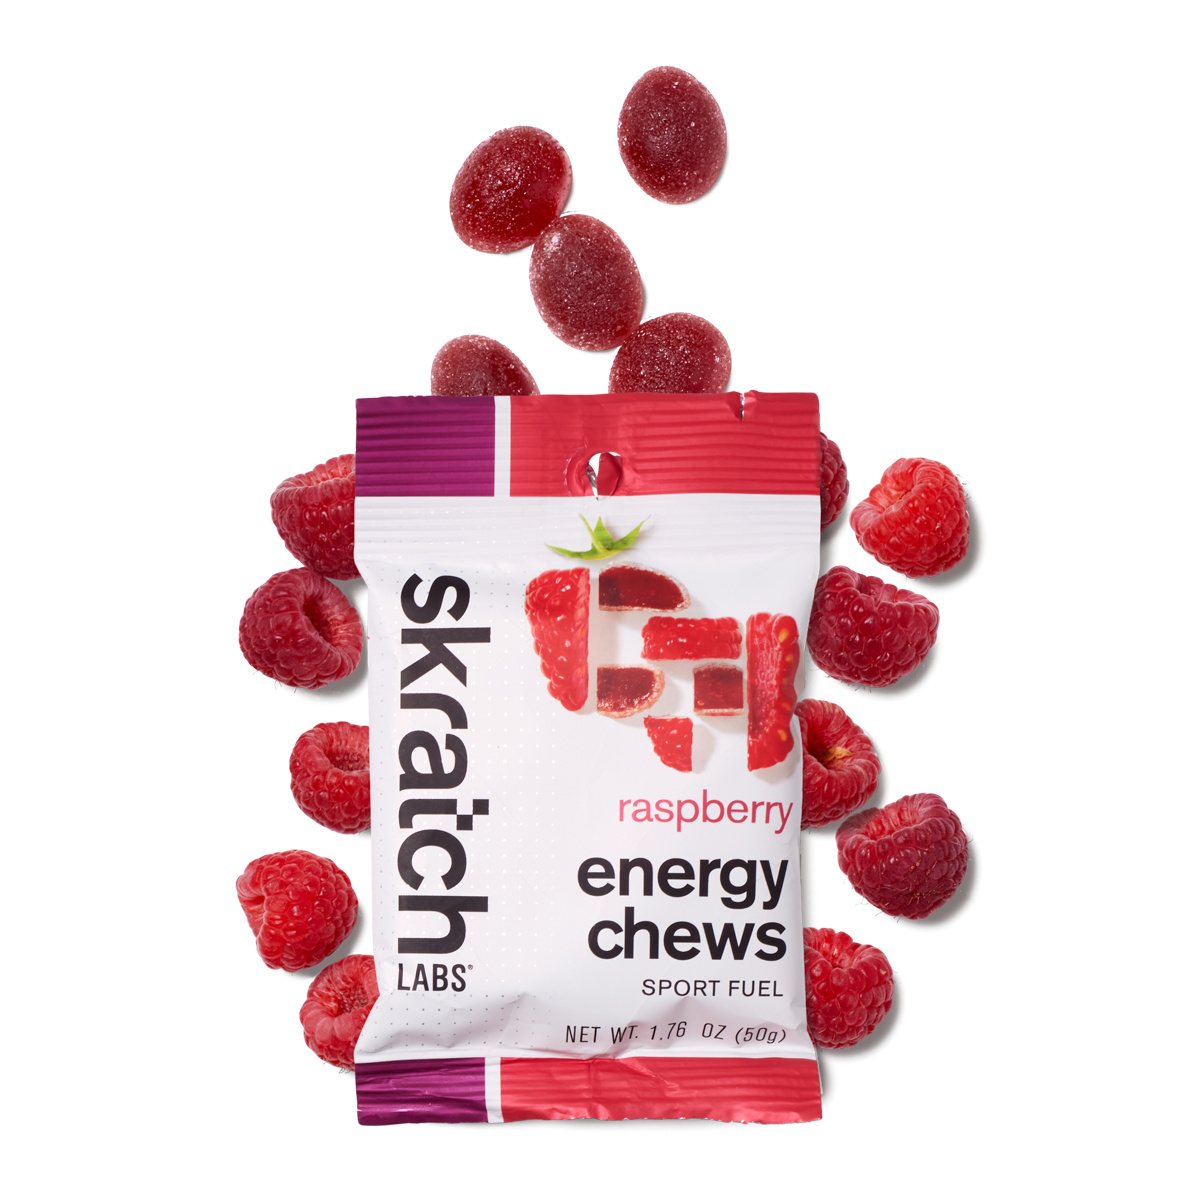 A packet of Skratch Labs Raspberry flavored energy chews